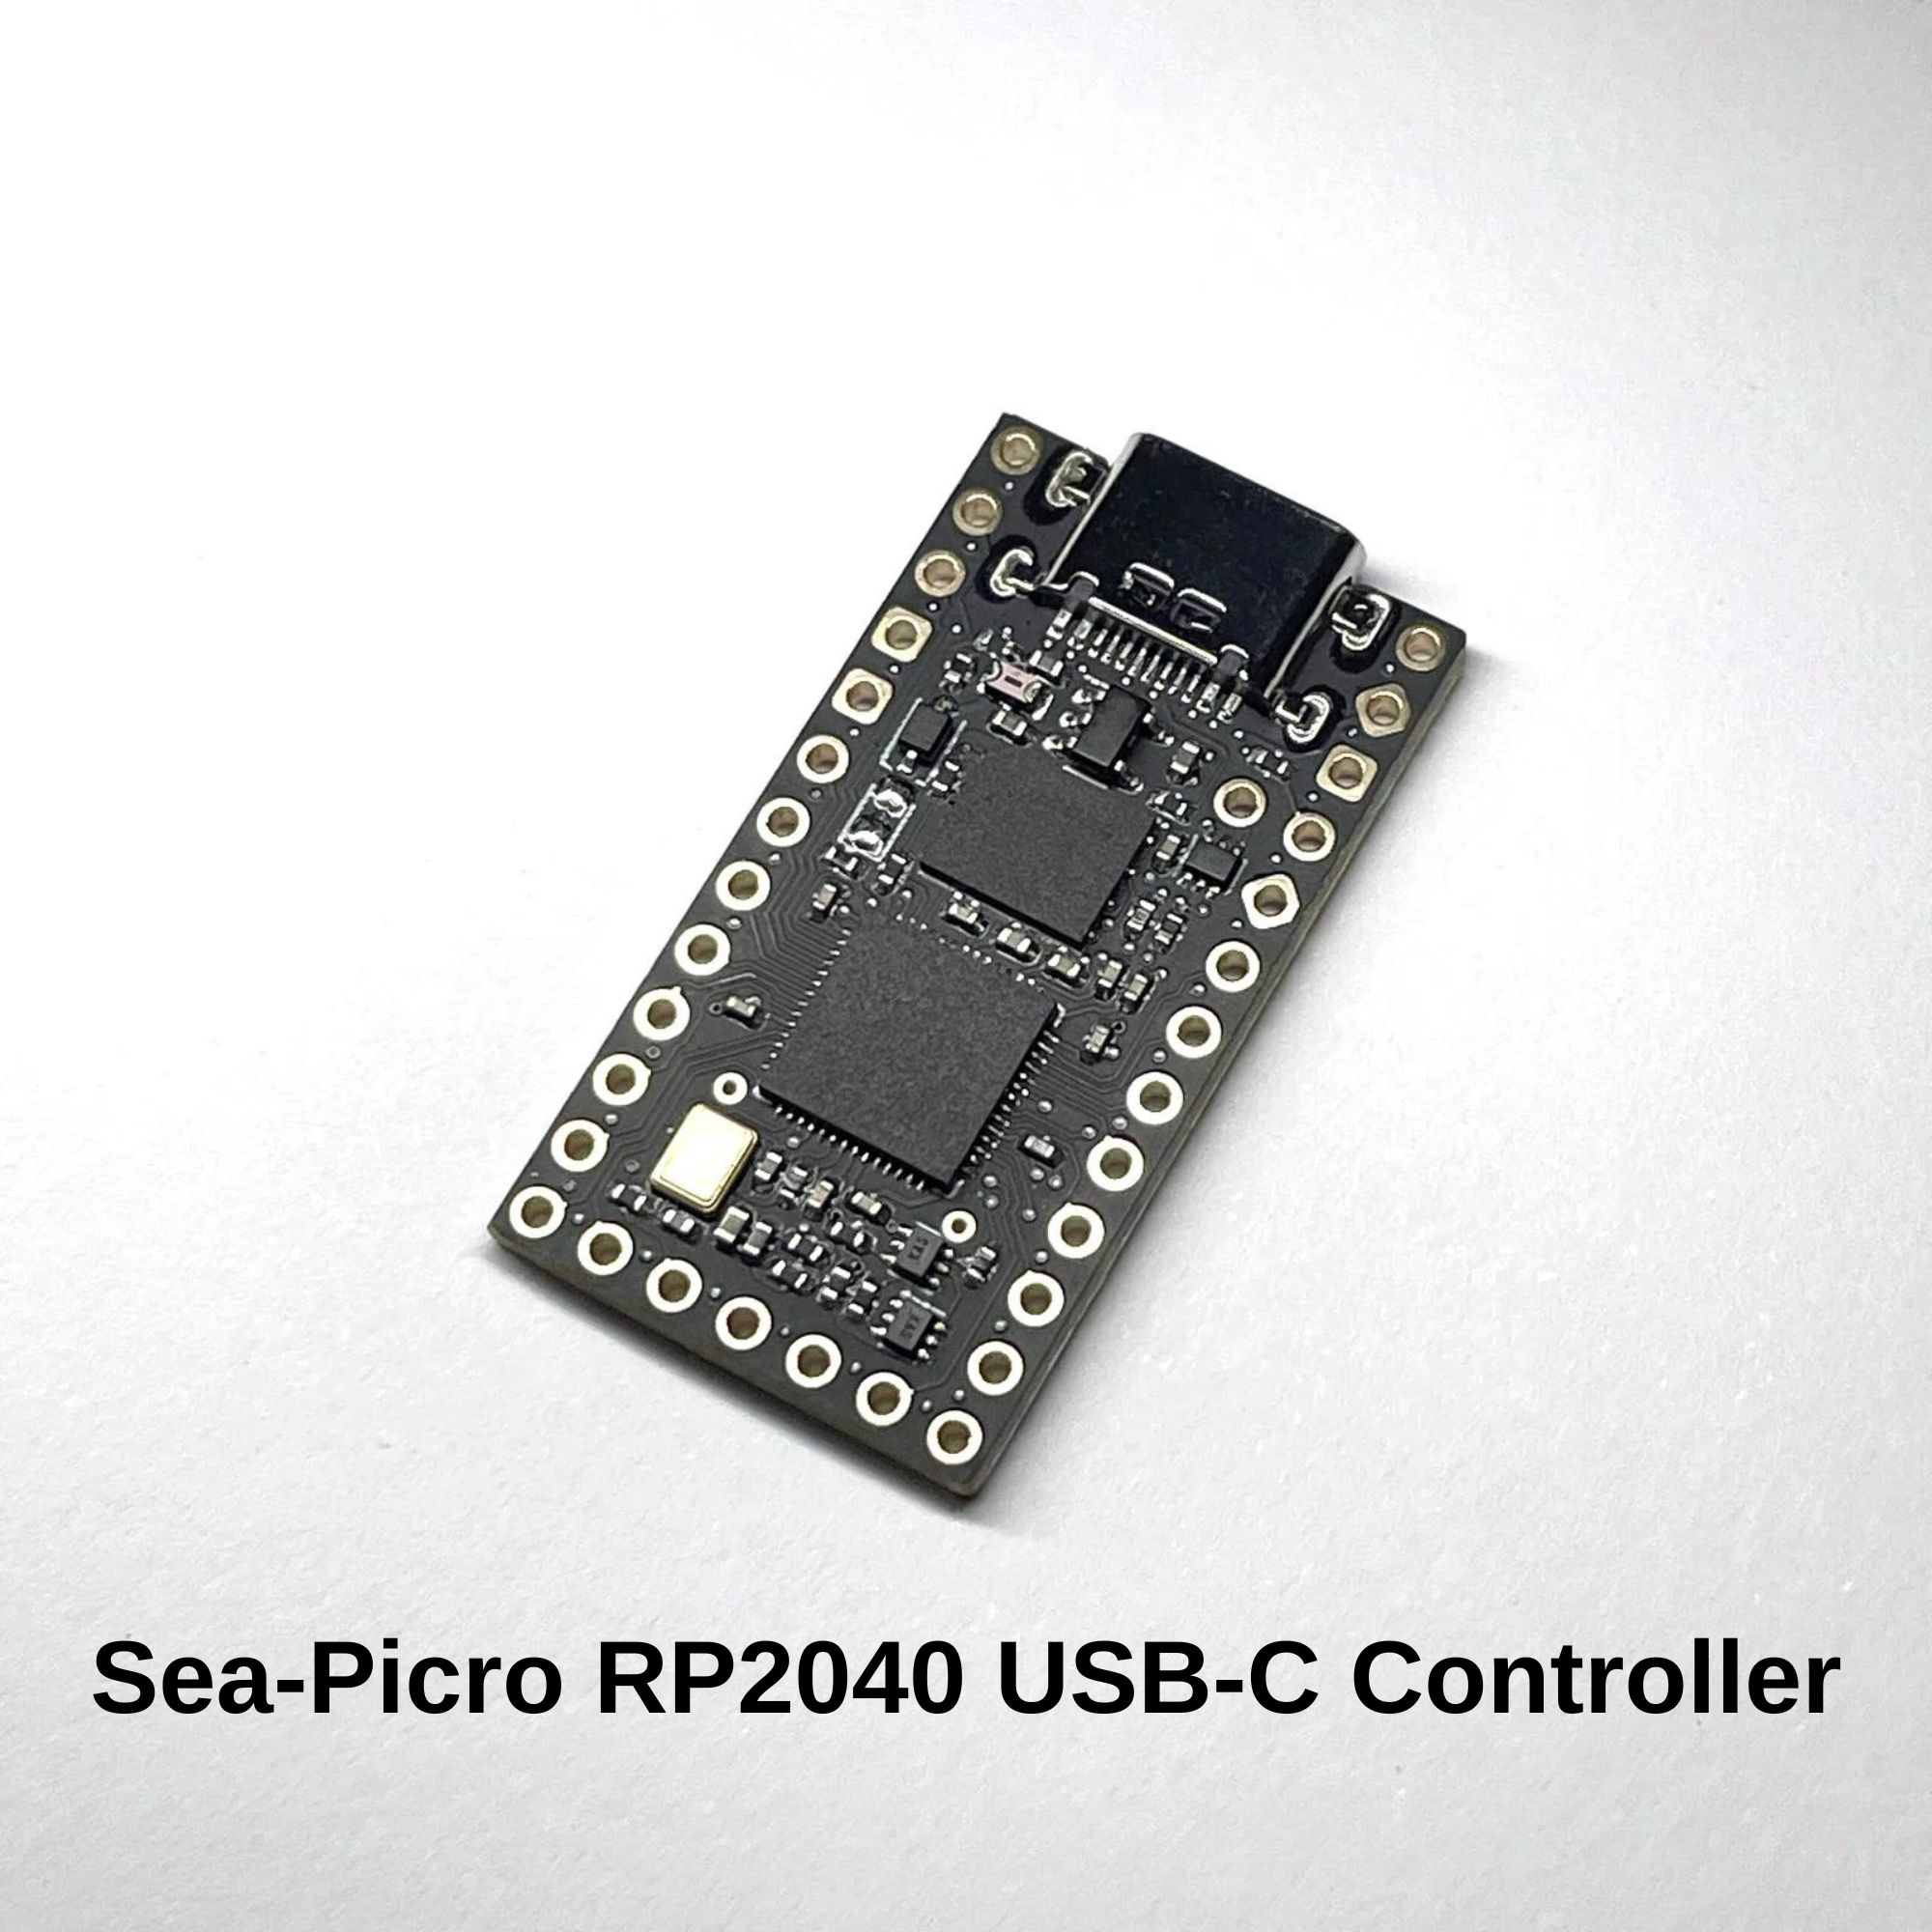 Sweep v2.2 with Sea-Picro RP2040 Controller (1)